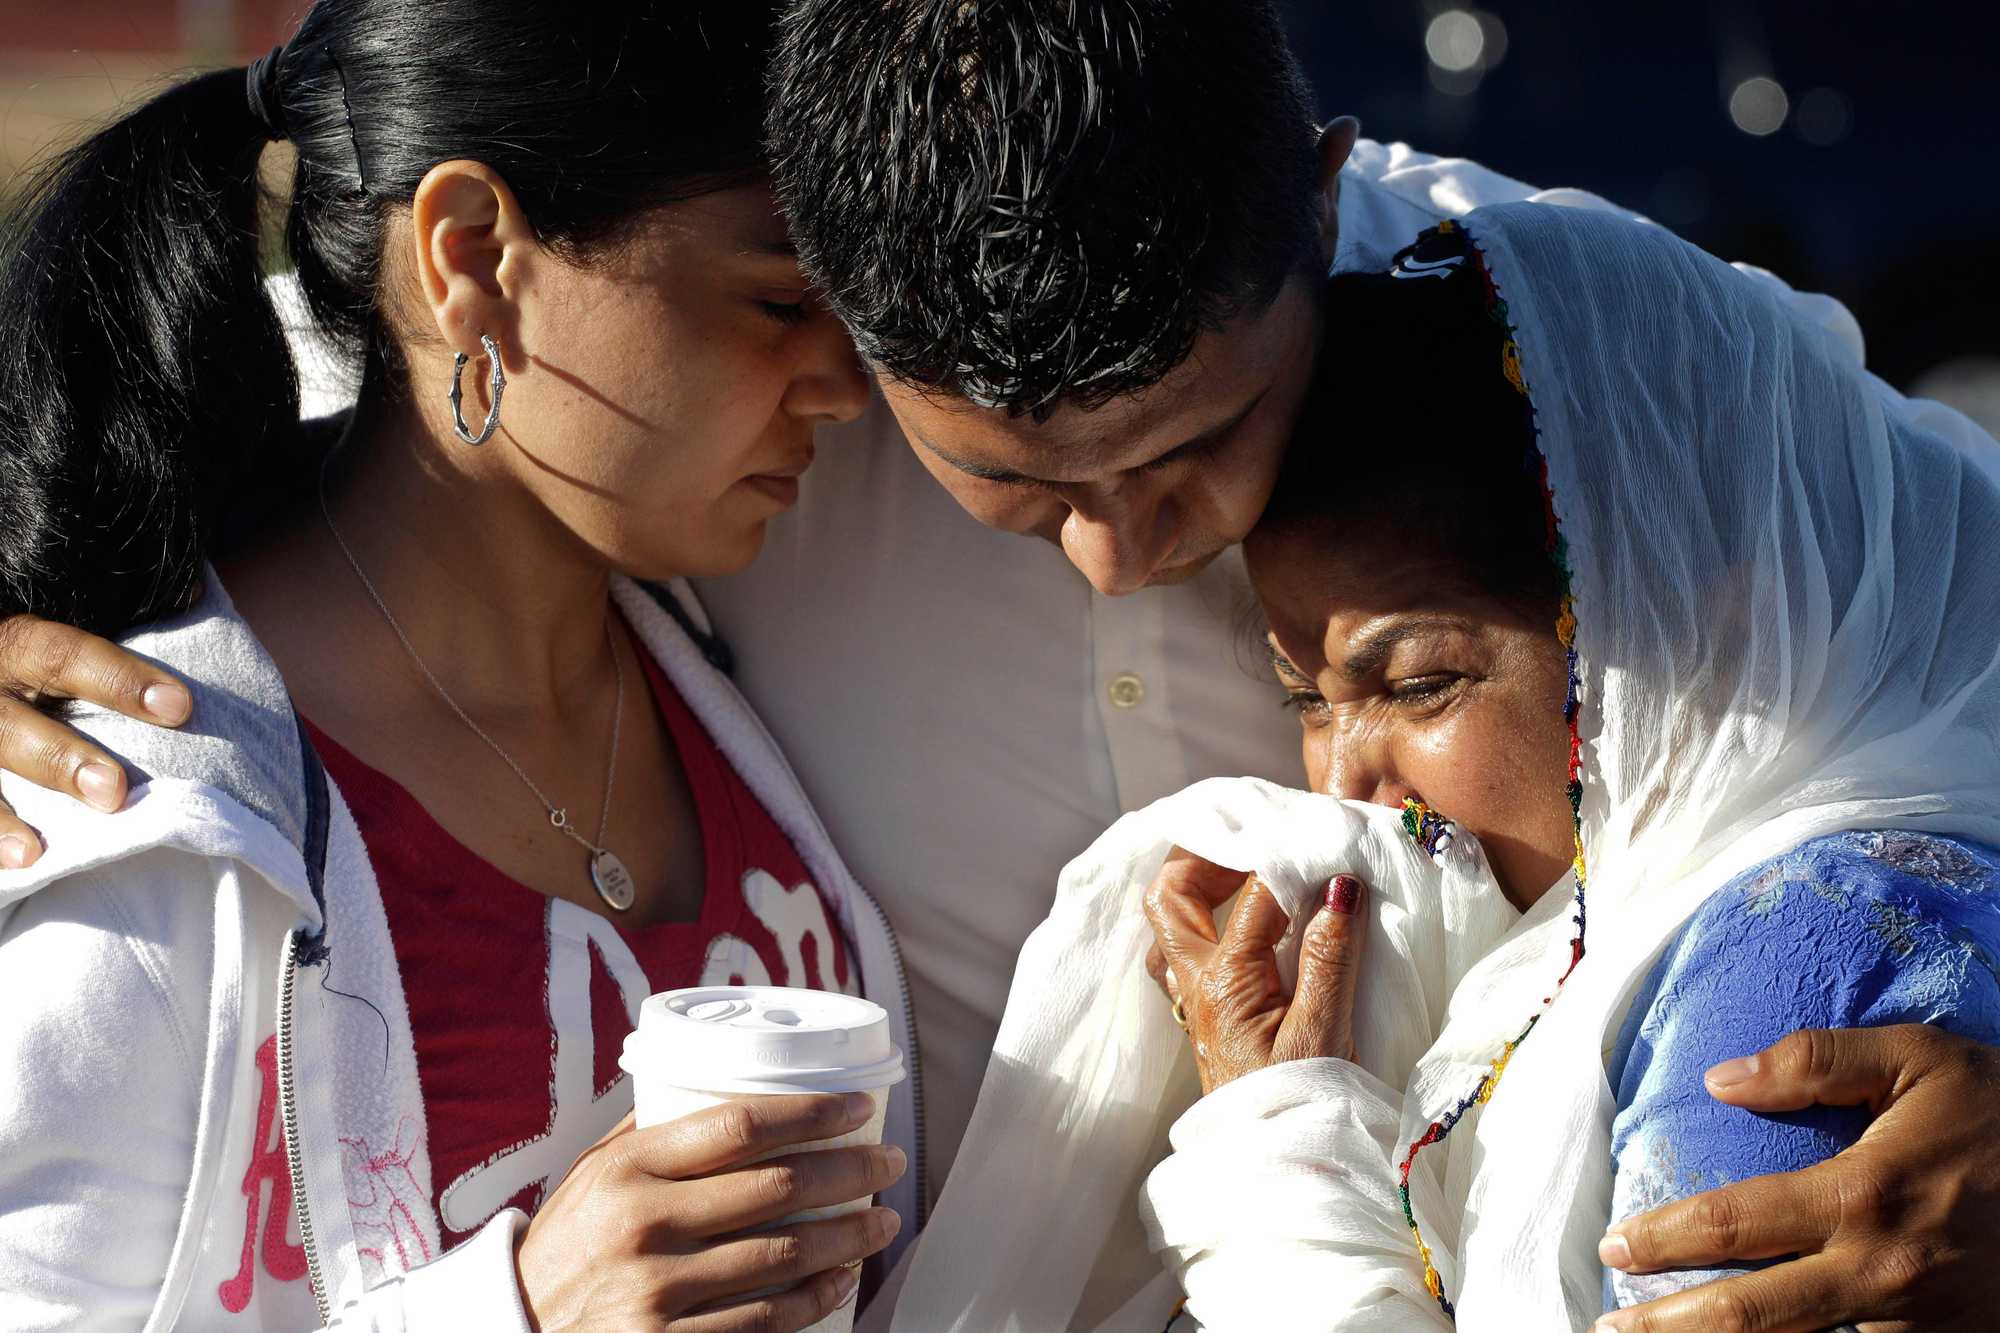 Amardeep Kaleka (center), son of the president of the Sikh Temple of Wisconsin, comforted members of the temple after the shooting. Satwant Kaleka, 65, founder and president of the temple, died in the shooting. He was among four priests who died. 